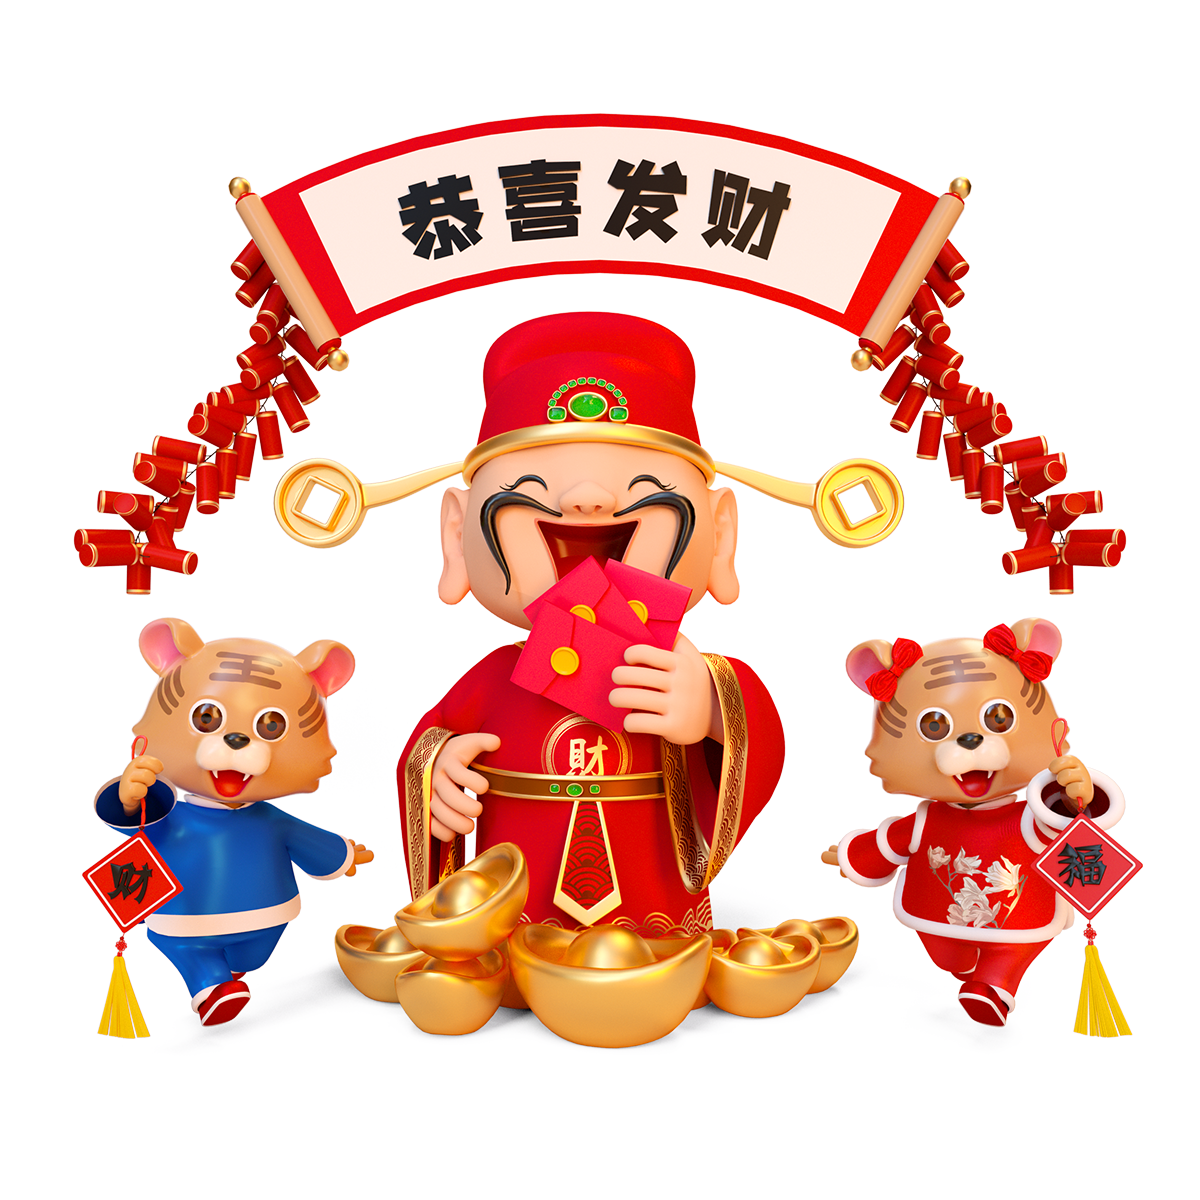 Welcome to the God of Wealth in the Spring Festival of the Year of the Tiger-Brand-SEO-Public Opinion-Optimization-米国生活